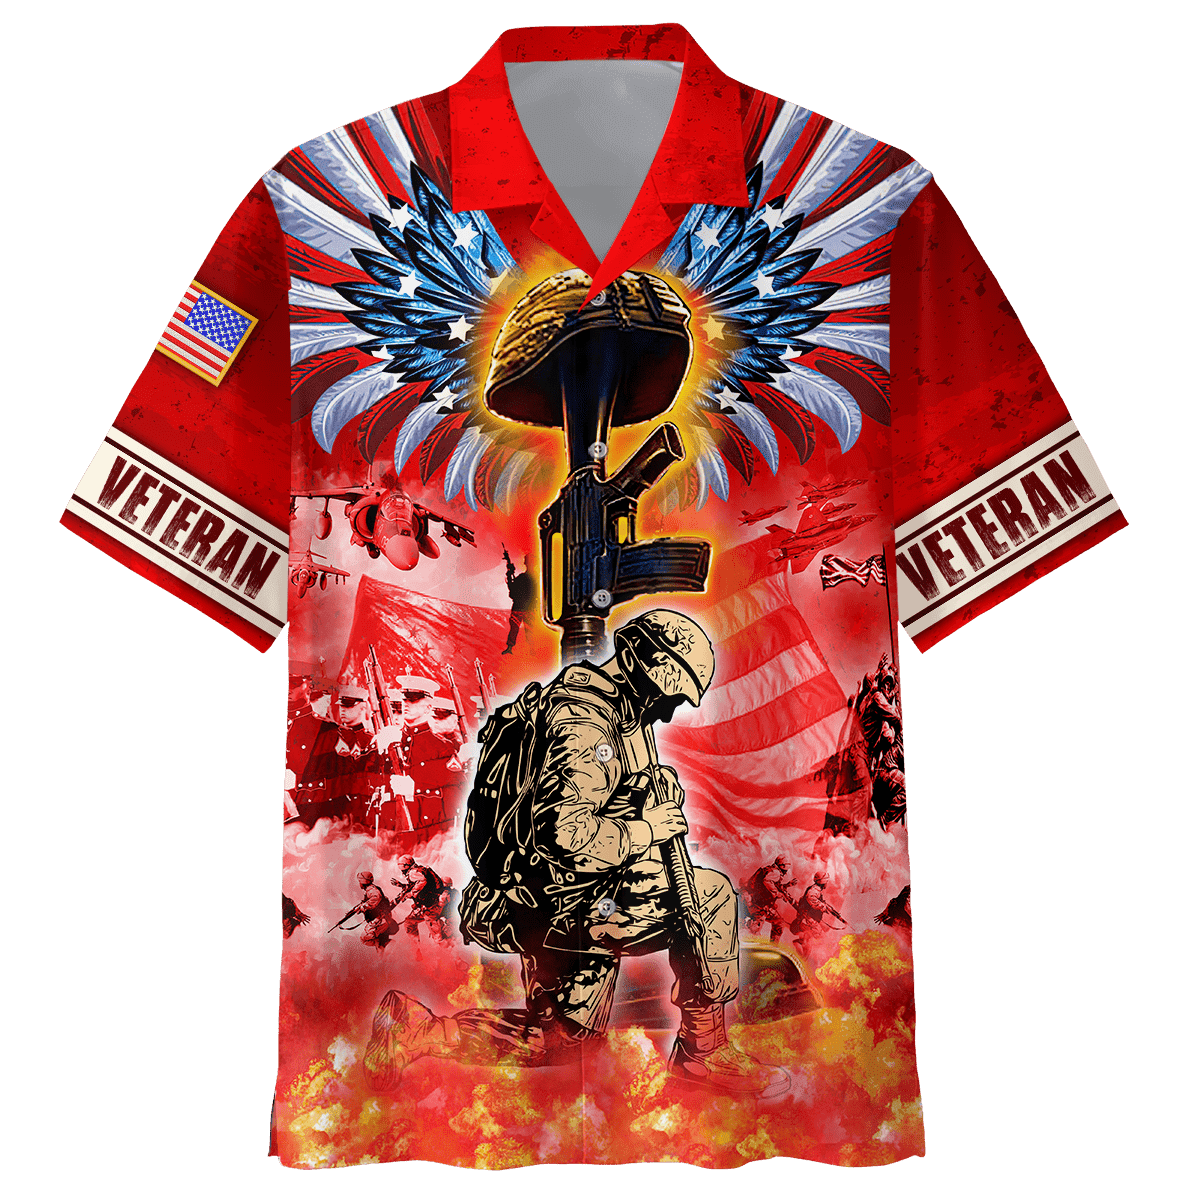 US Veteran - Freedom Is Not Free - Polo With Pocket